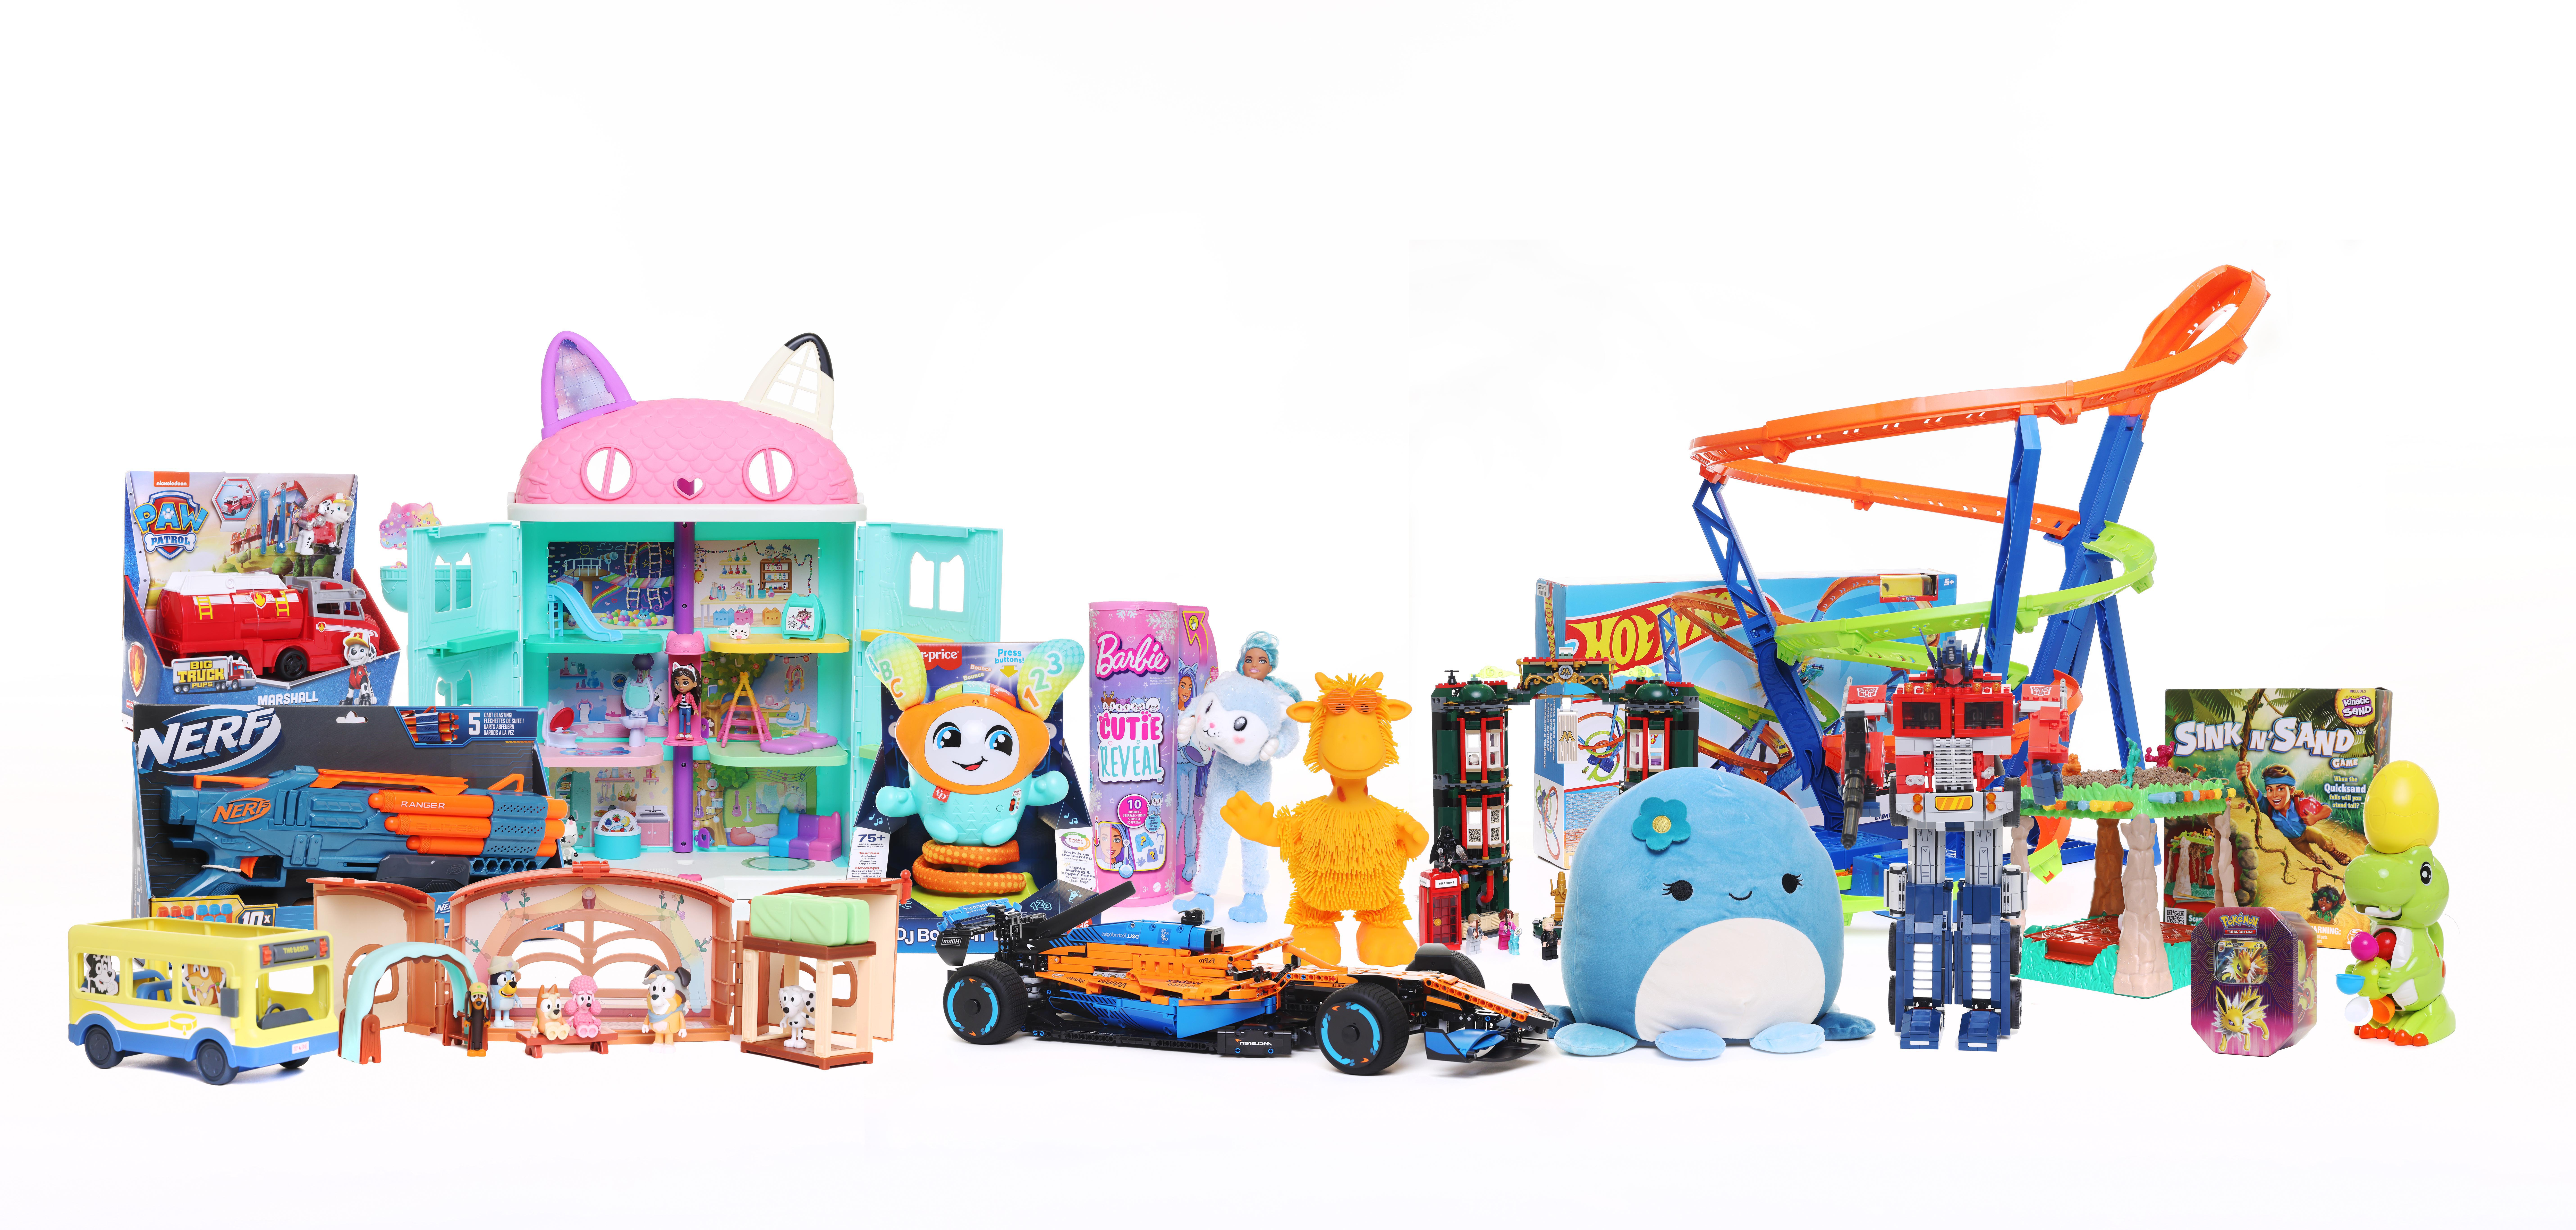 Argos Reveals the 15 Top Toys to Dominate 2022 Christmas Wish Lists